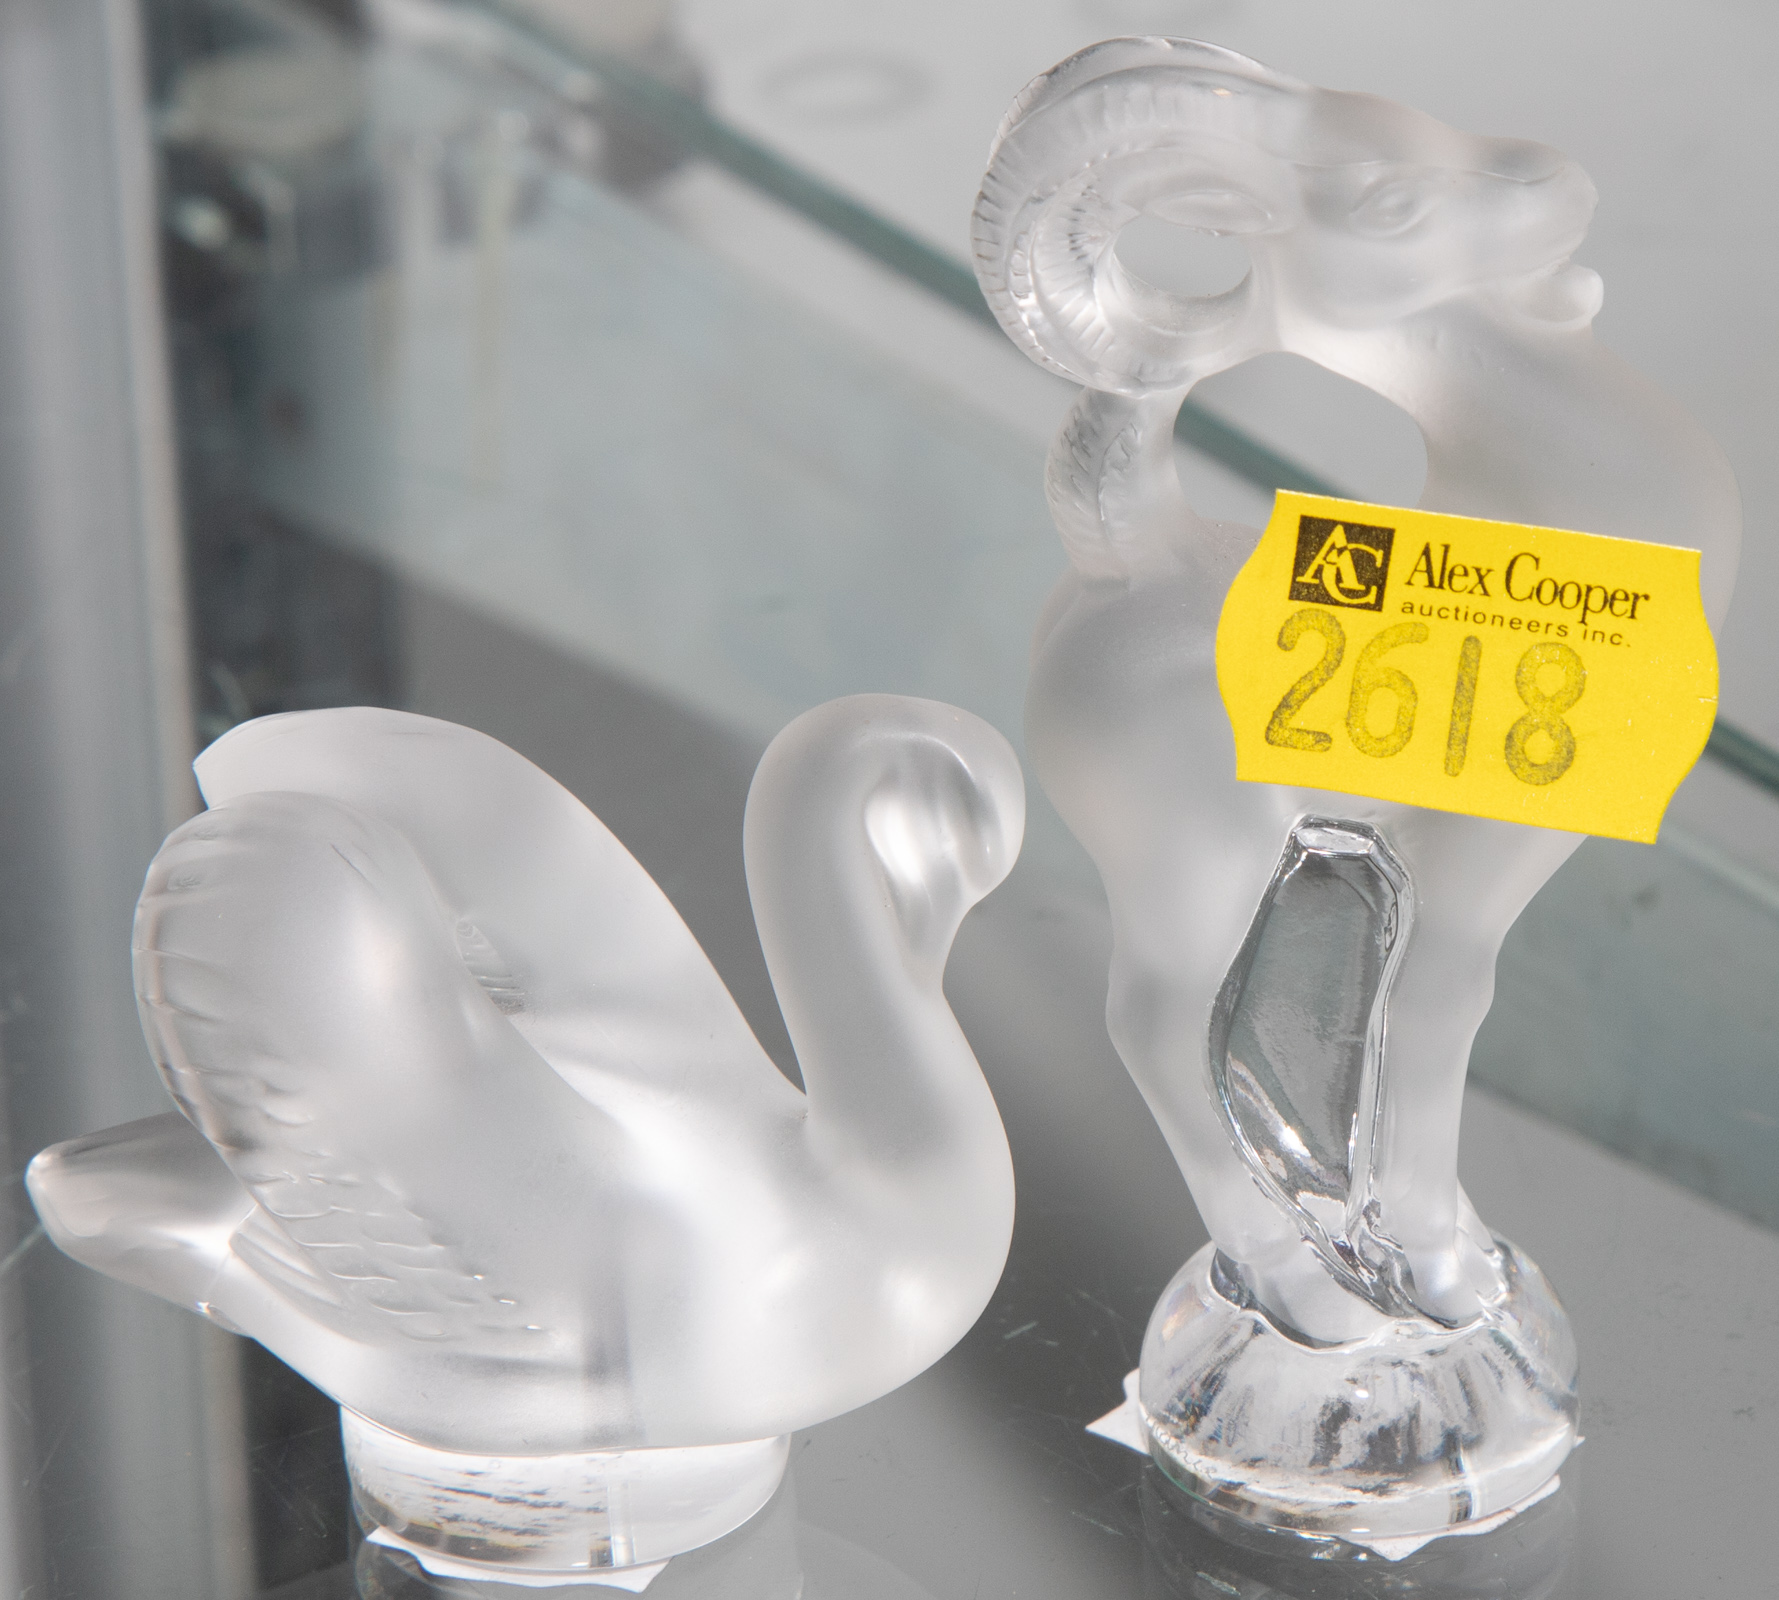 TWO LALIQUE GLASS ANIMAL FIGURES 337d1a